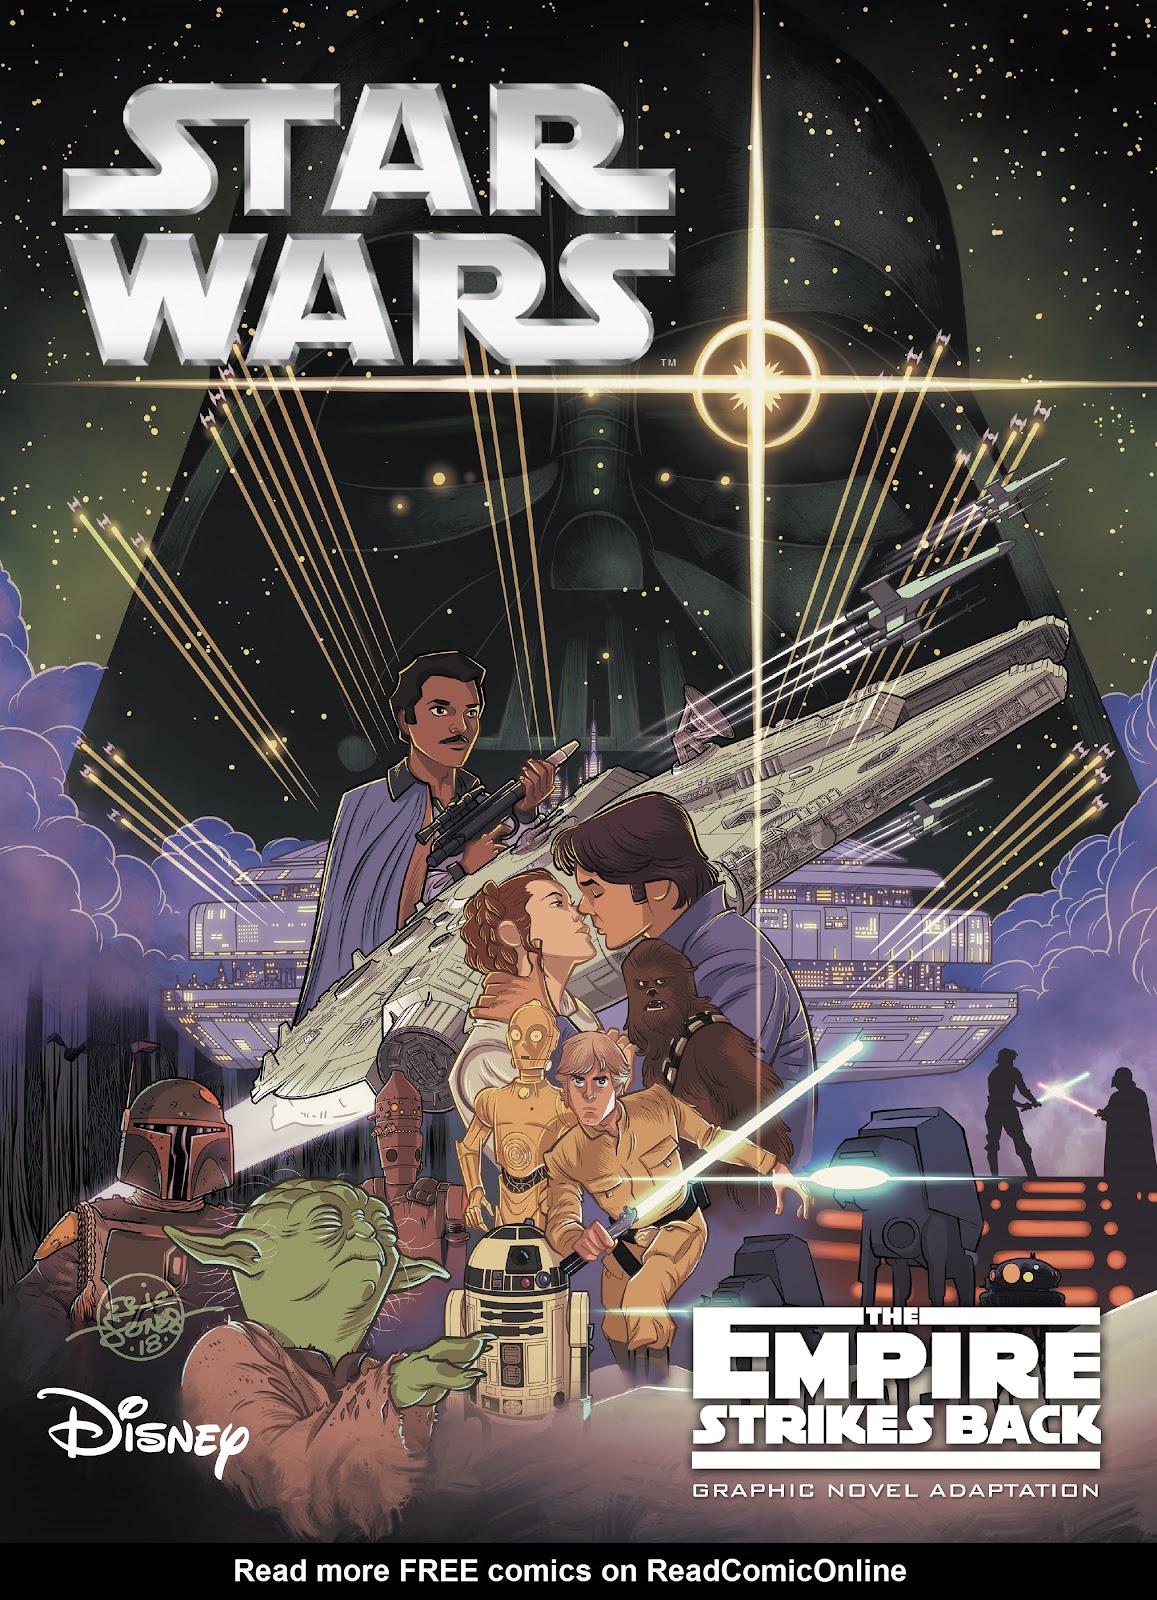 Star Wars: The Empire Strikes Back Graphic Novel Adaptation Full Page 1